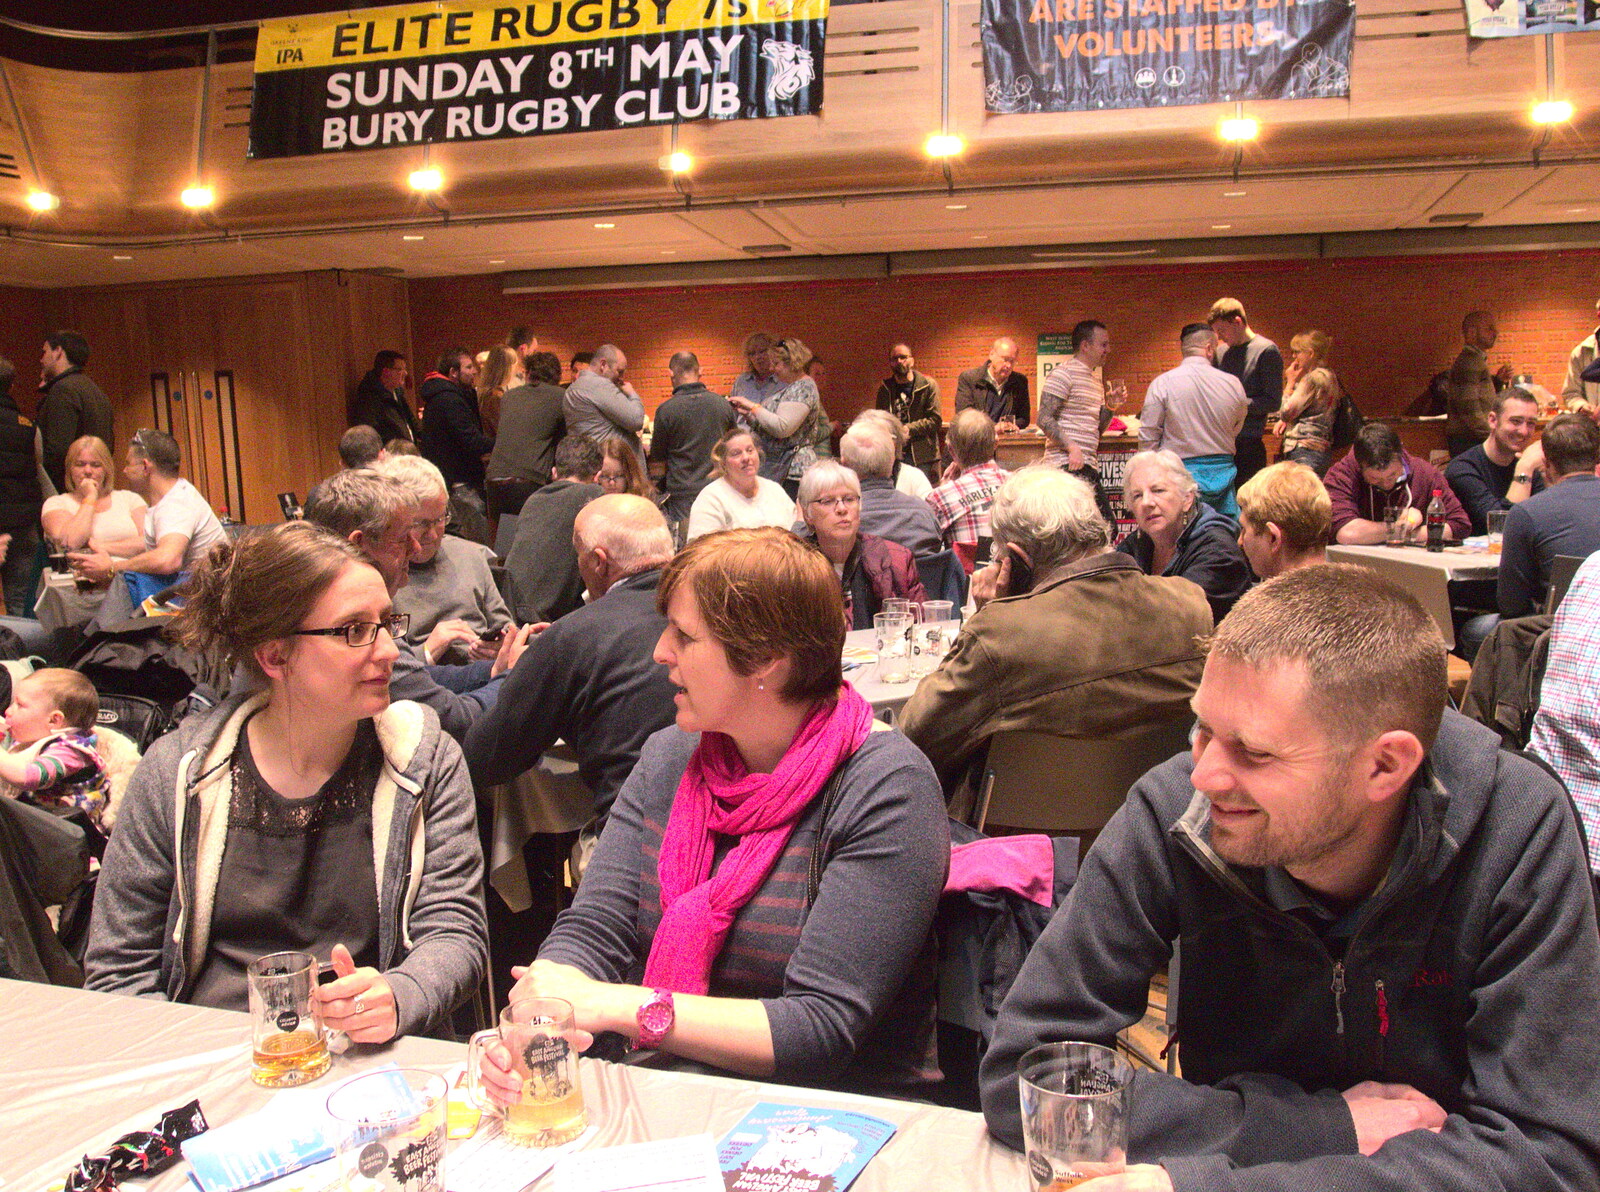 Table conversation from The East Anglian Beer Festival, Bury St Edmunds, Suffolk - 23rd April 2016